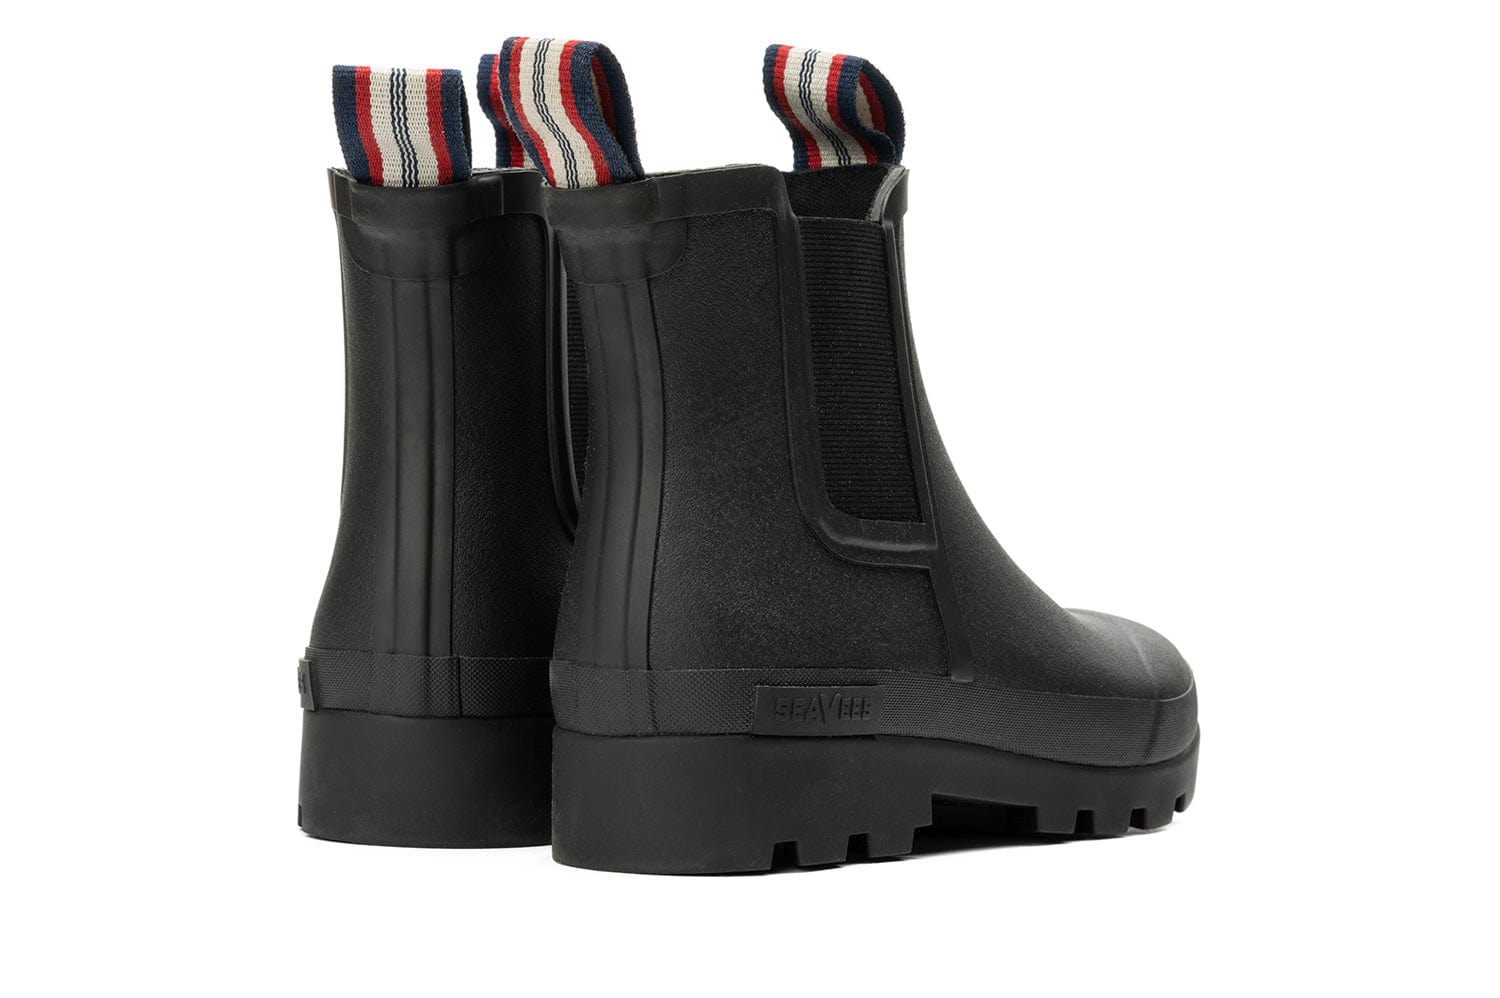 Back view of the Bolinas Off Shore Boot in Black highlighting the heel loop and black sole.